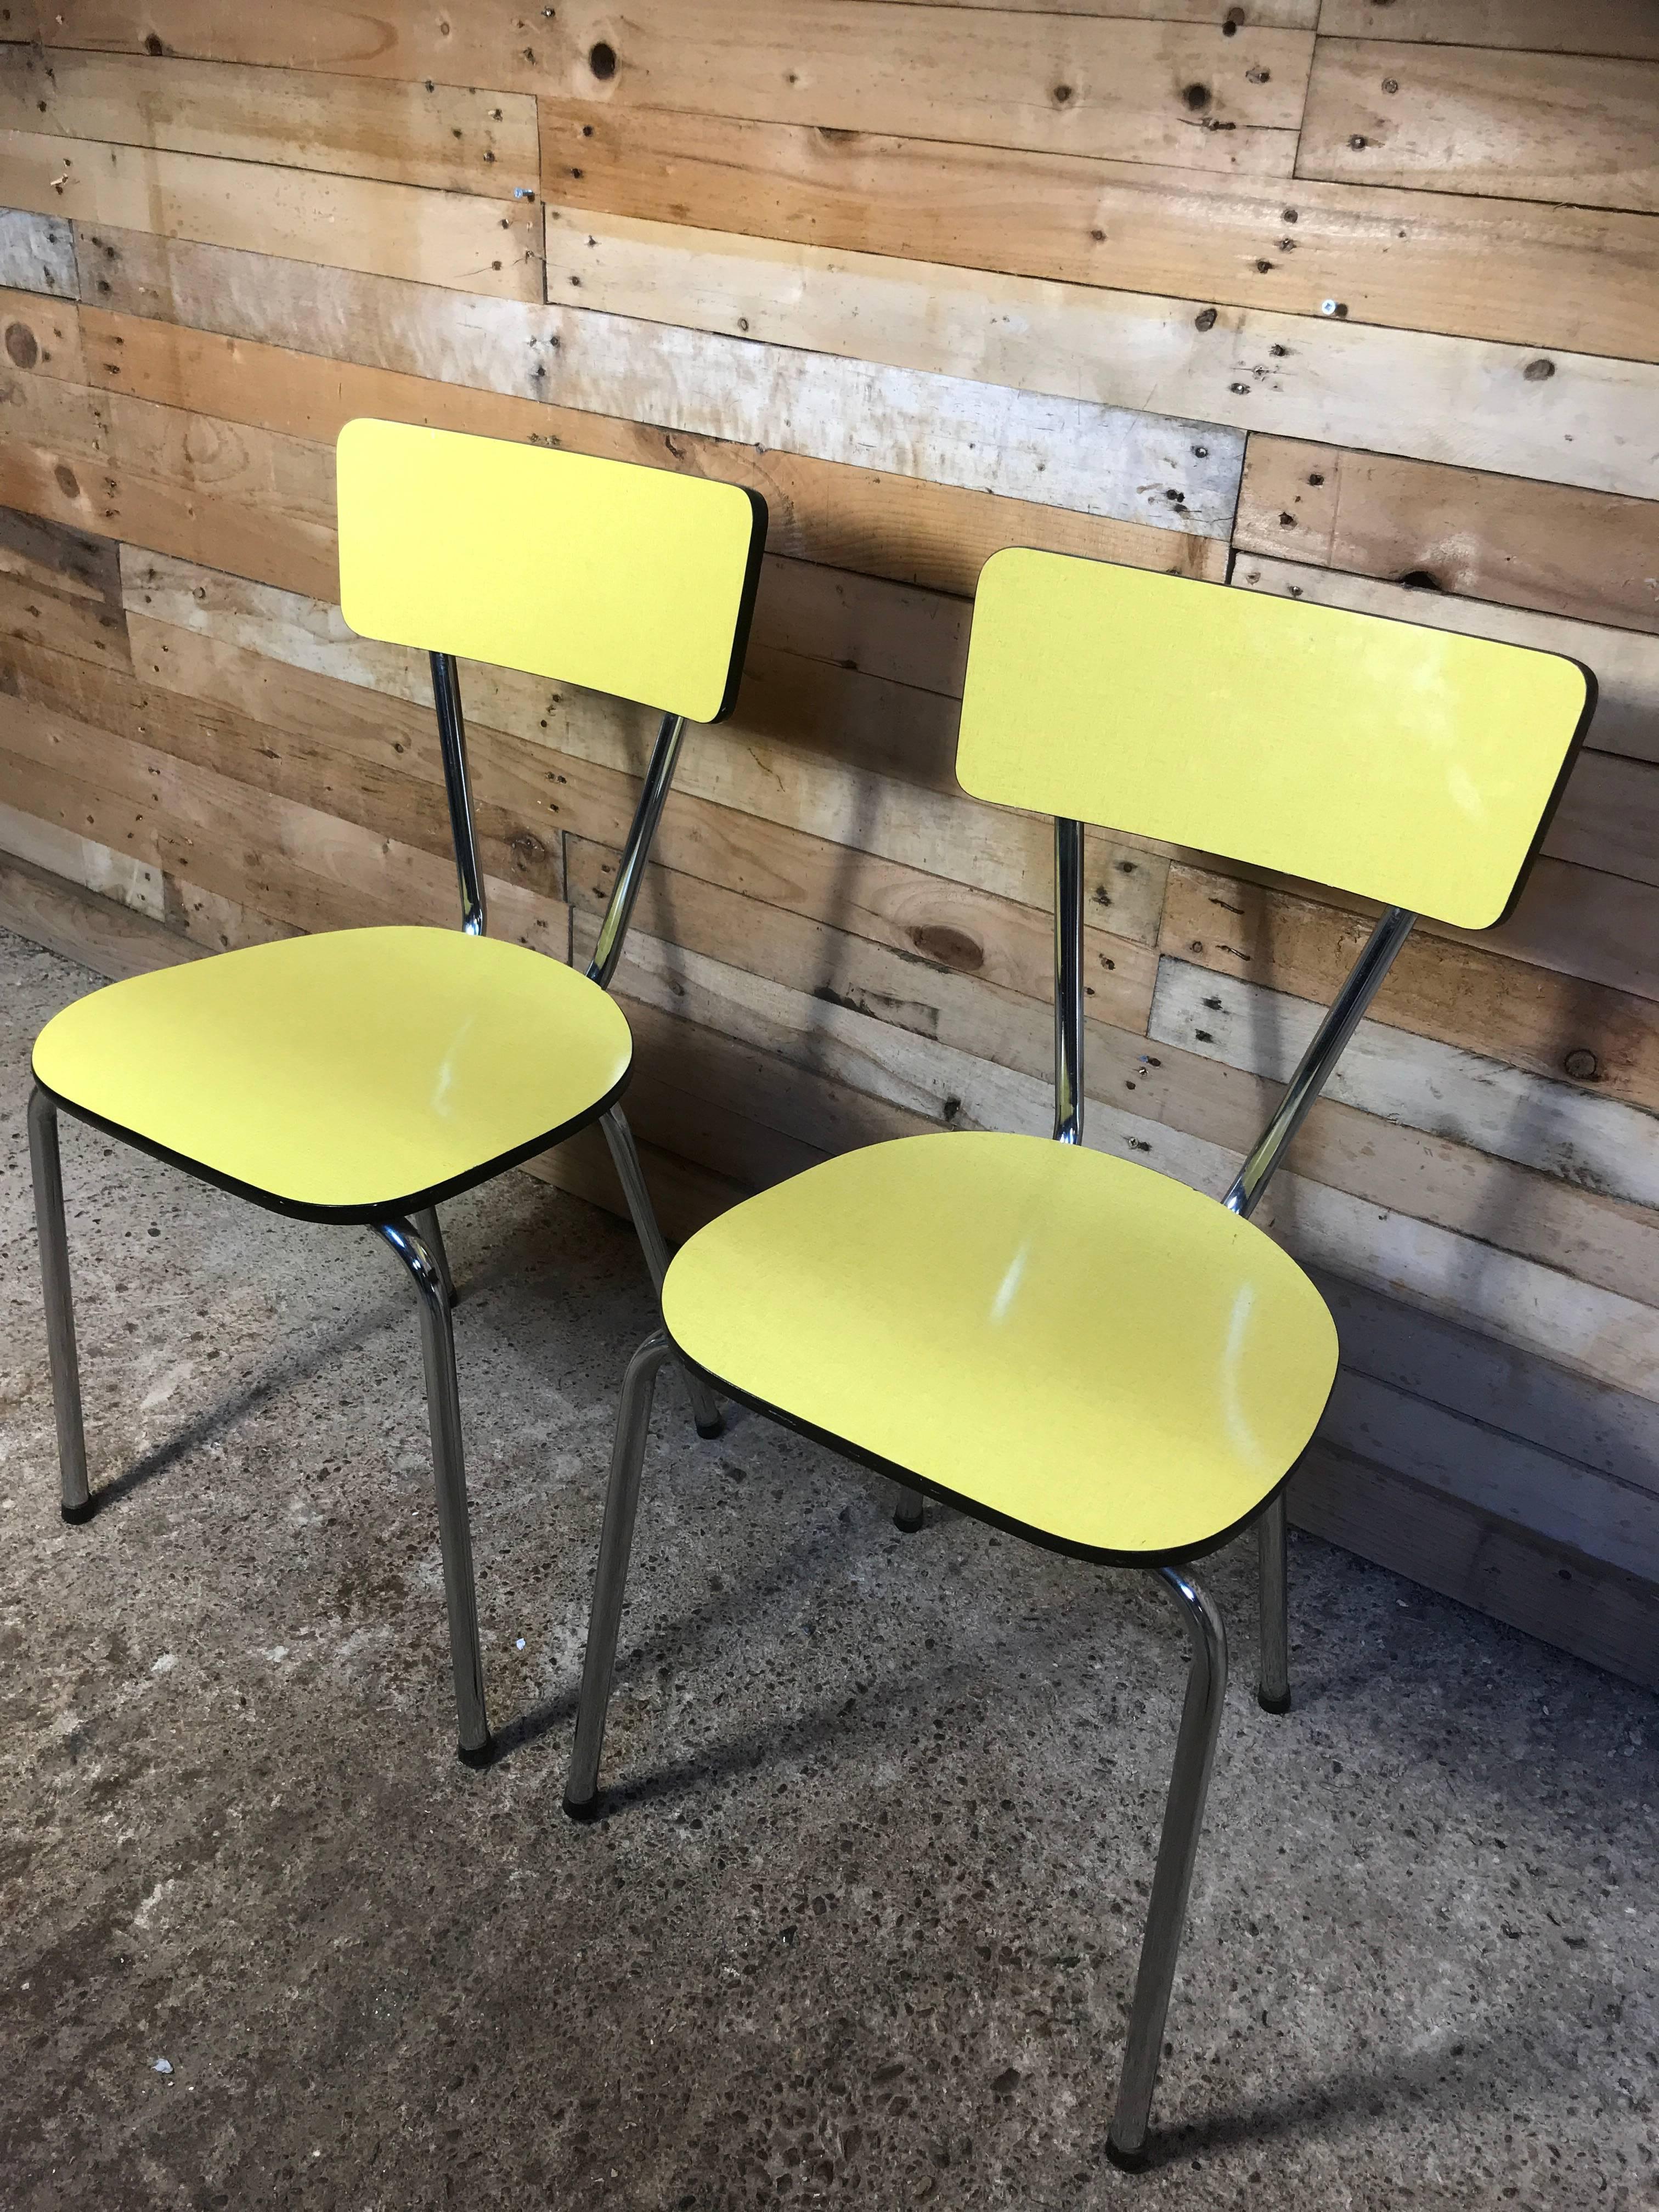 20th Century 1950s Vintage Retro Yellow and Chrome Melamine Chairs For Sale